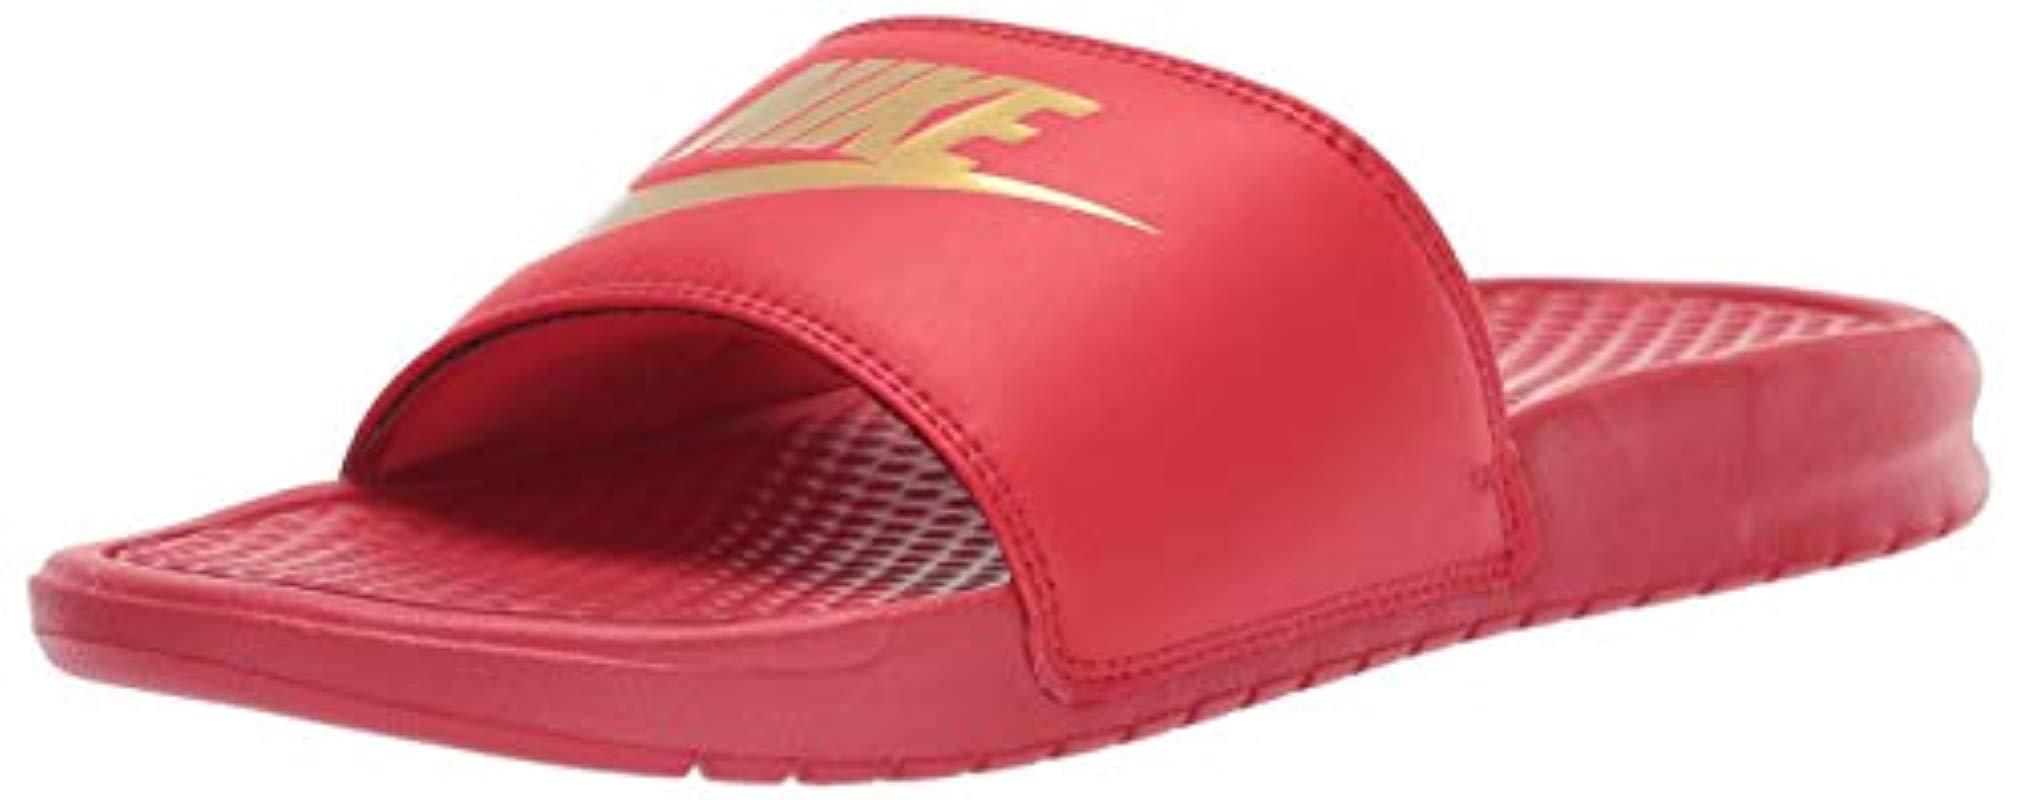 Nike Synthetic Benassi Just Do It Athletic Sandal in University Red/Metallic  Gold (Red) for Men - Lyst